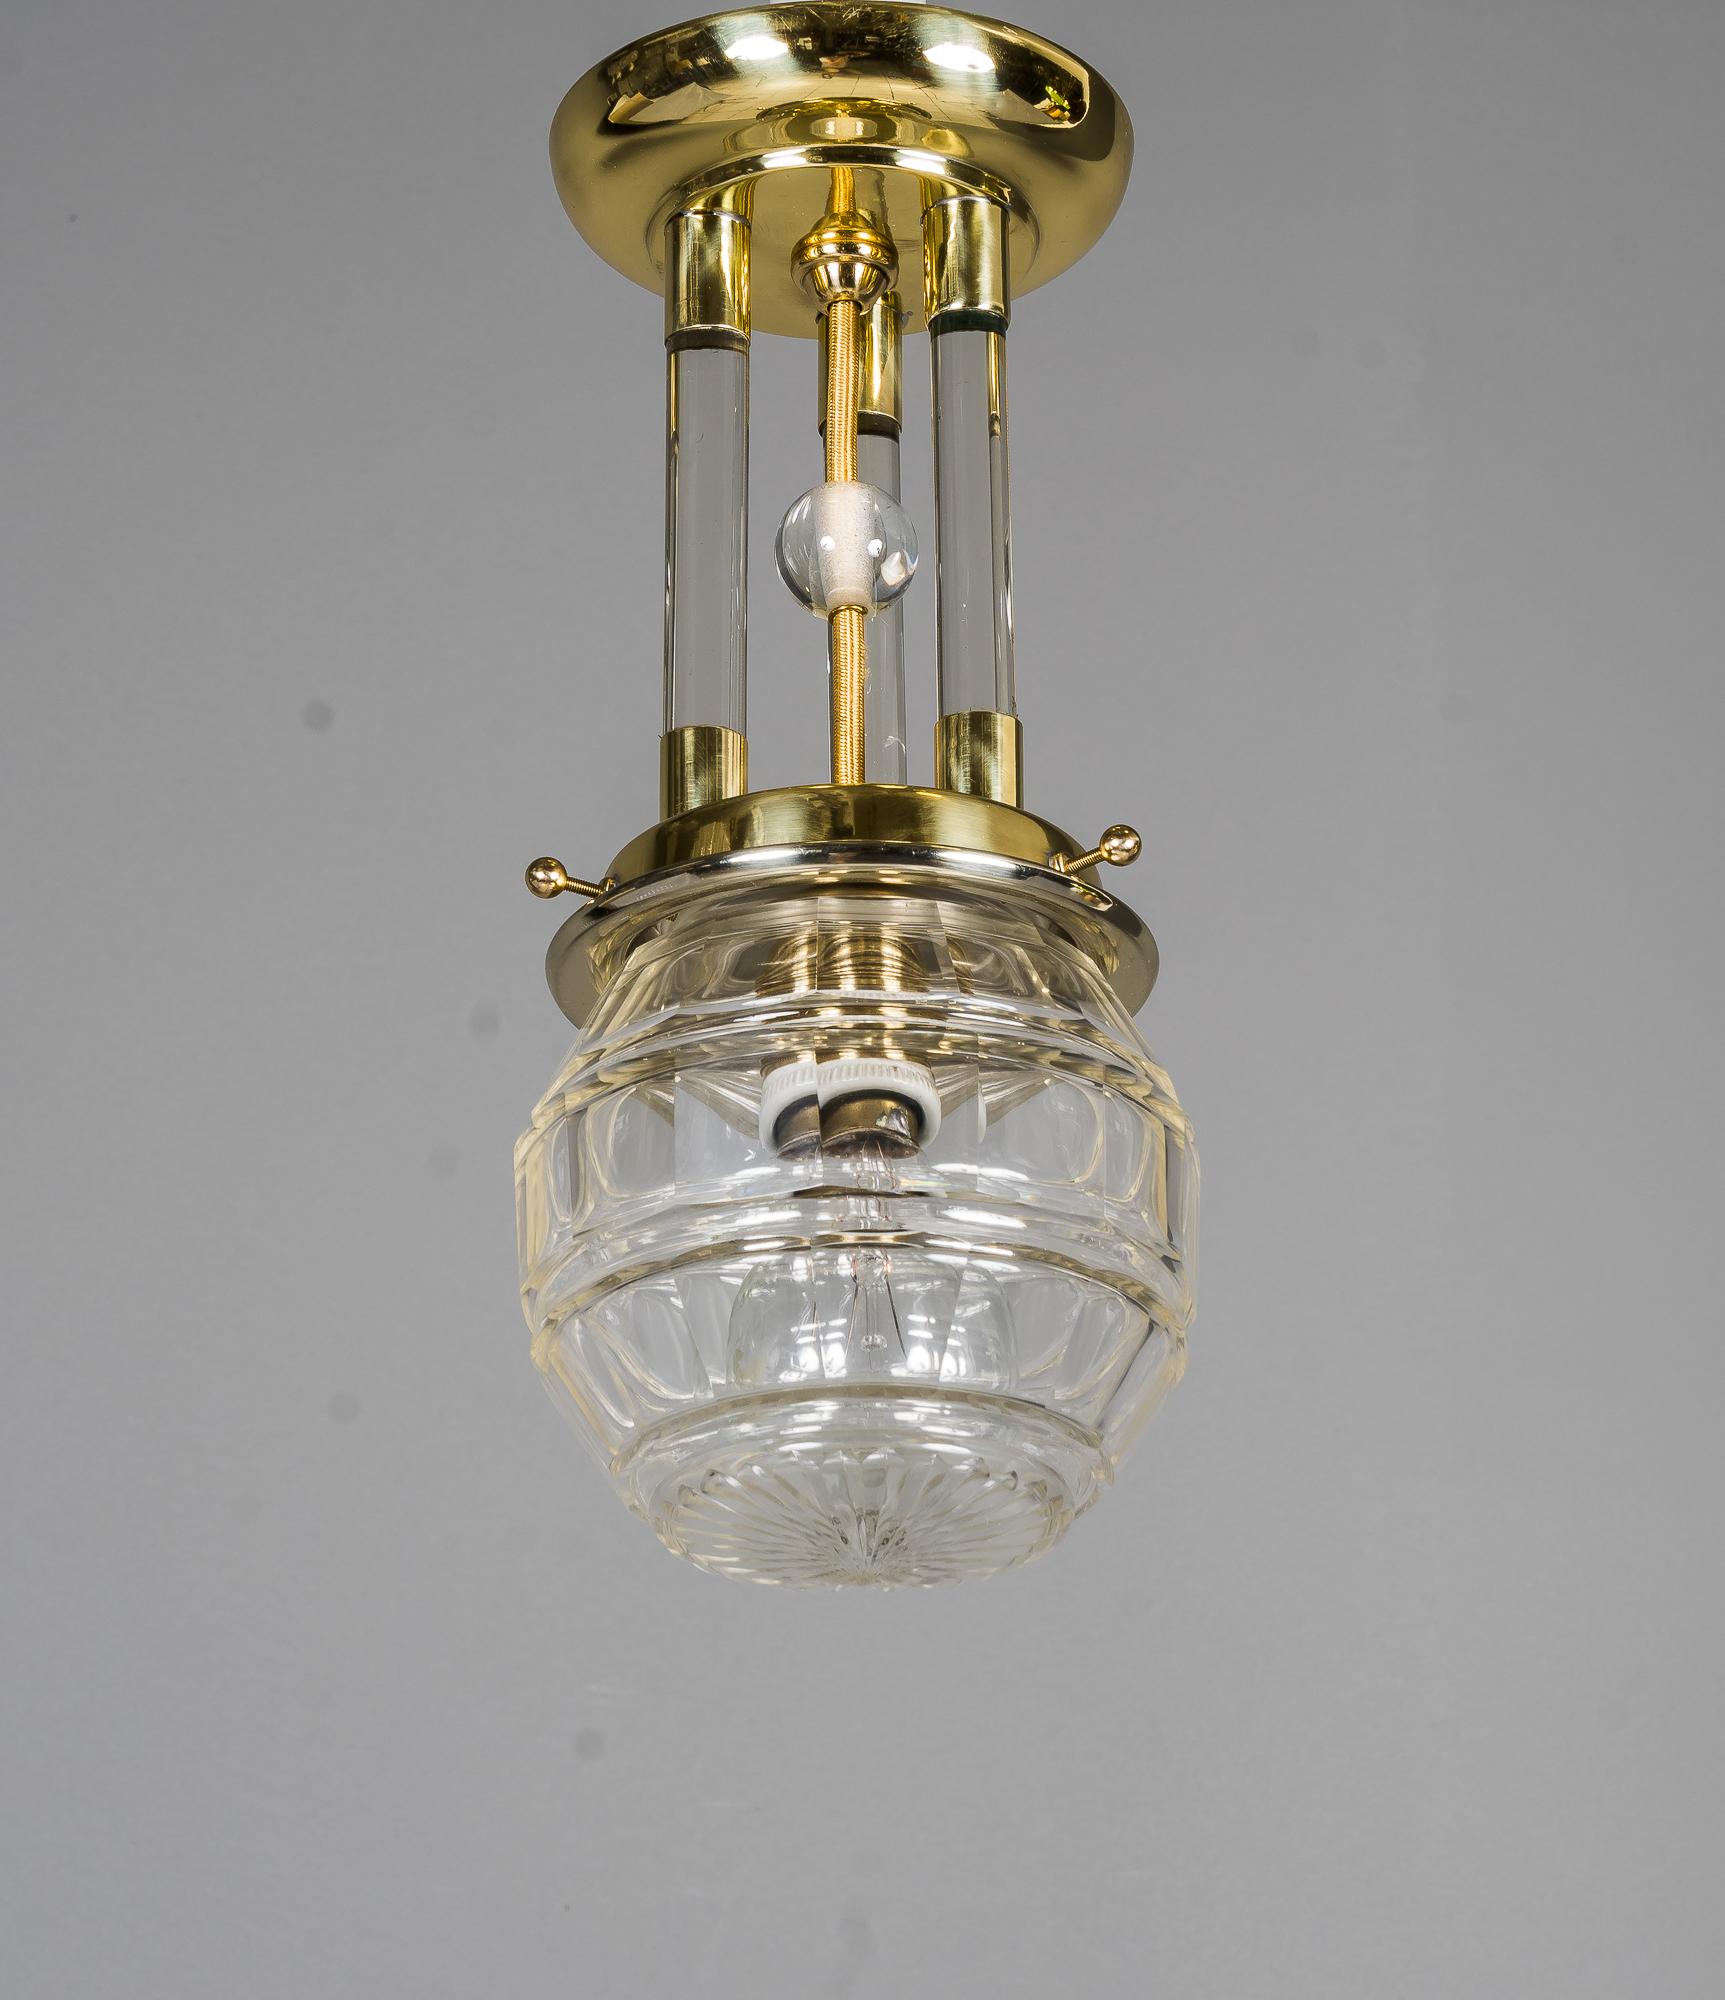 Art Deco ceiling lamp with original old cut glass shade, Vienna, around 1920s 
Brass parts polished and stove enamelled
Original old cut glass shade.
 